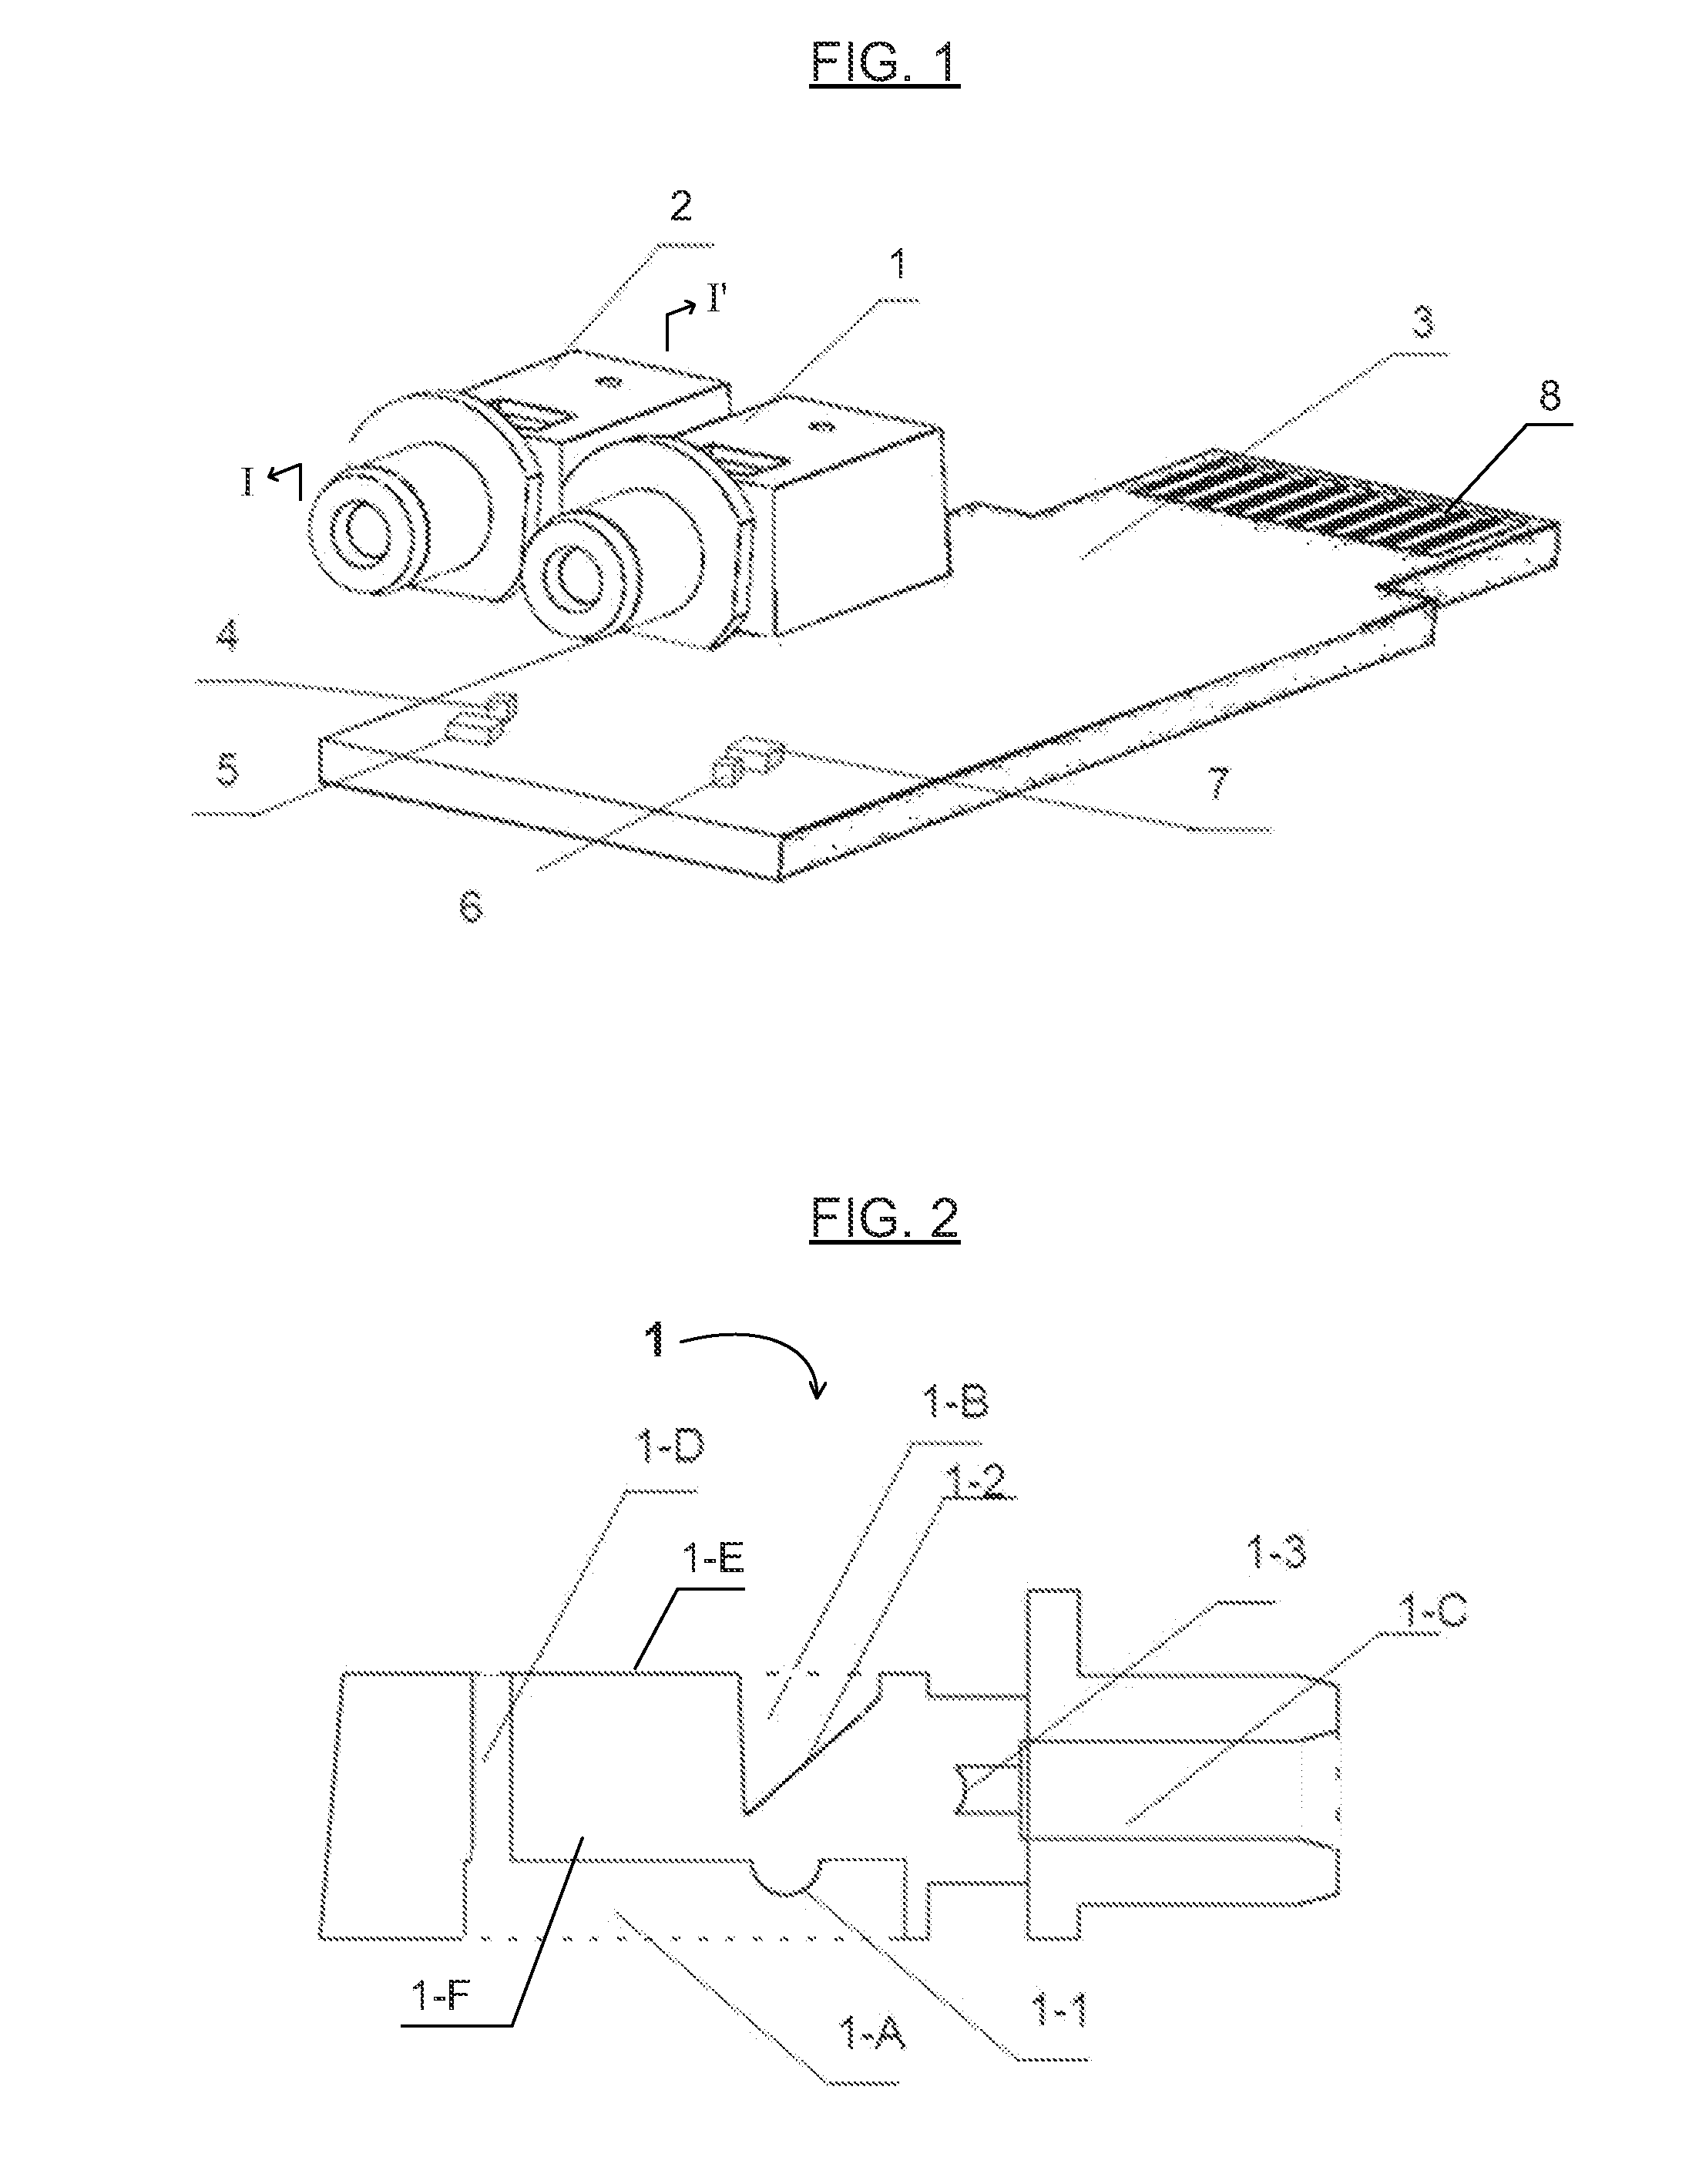 Integrated Lens With Multiple Optical Structures and/or Surfaces, Optical Module and Transceiver Including the Same, and Methods of Making and Using the Same